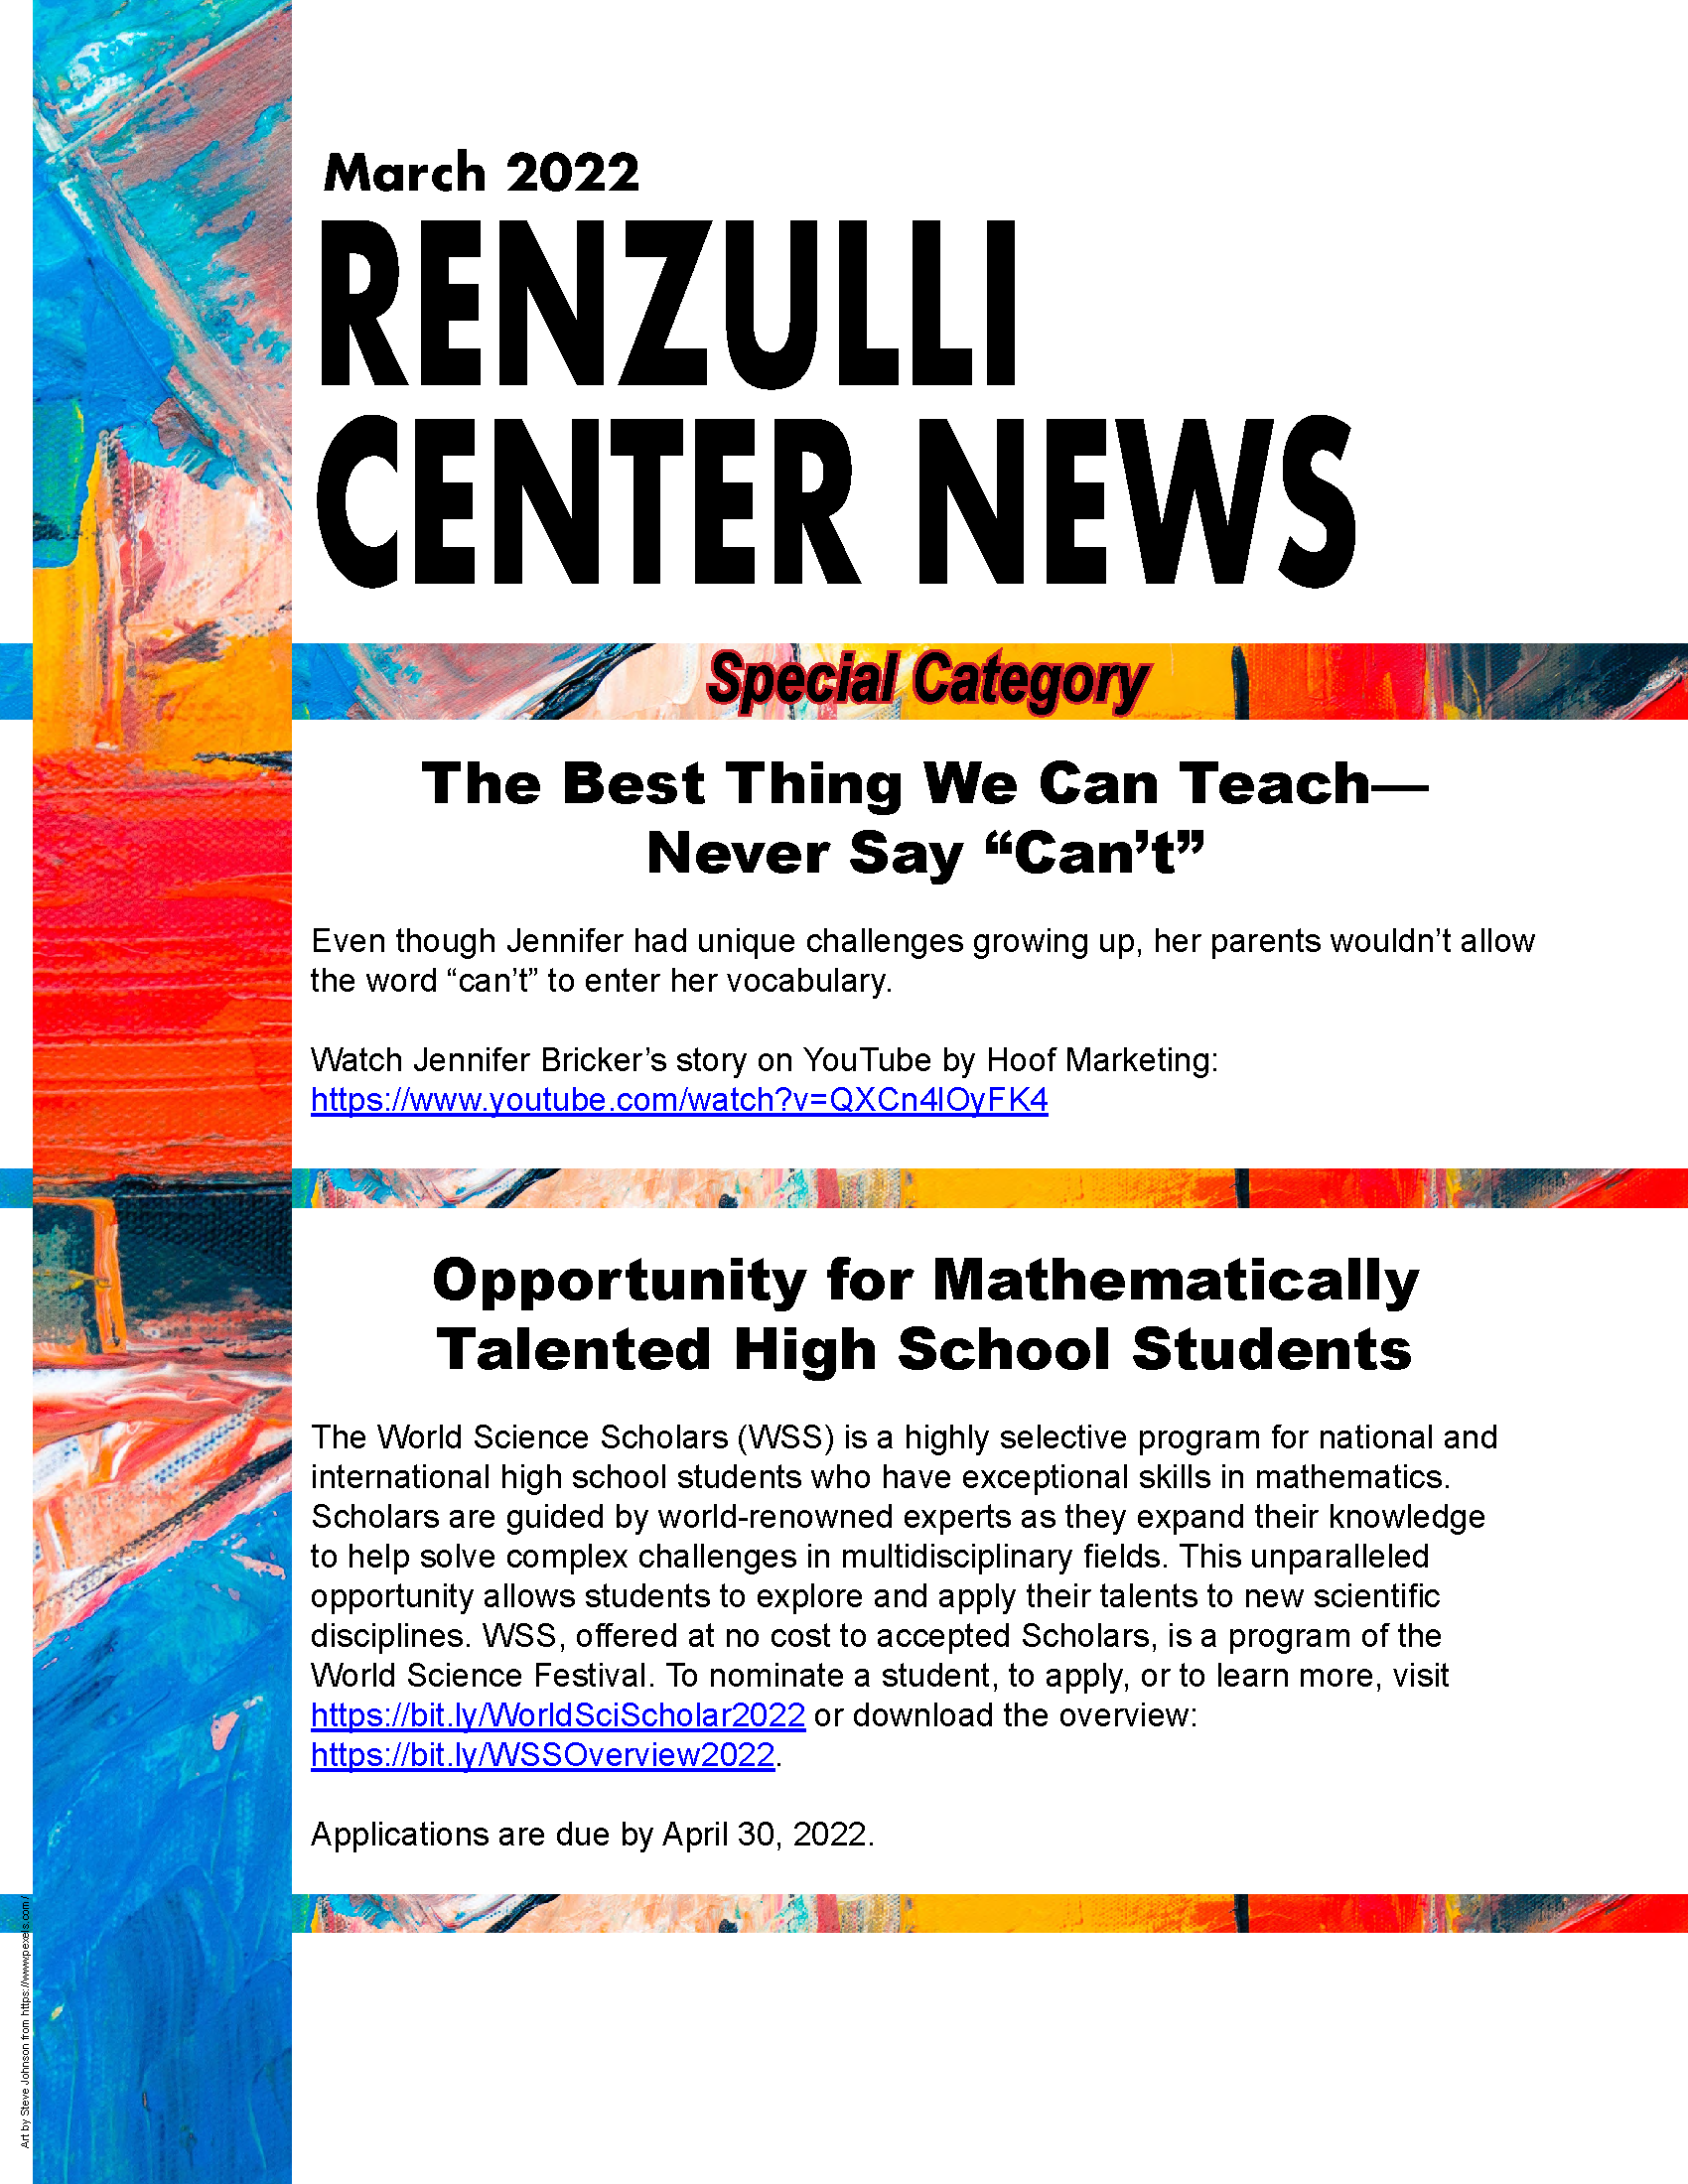 March 2022 Renzulli News Cover Graphic